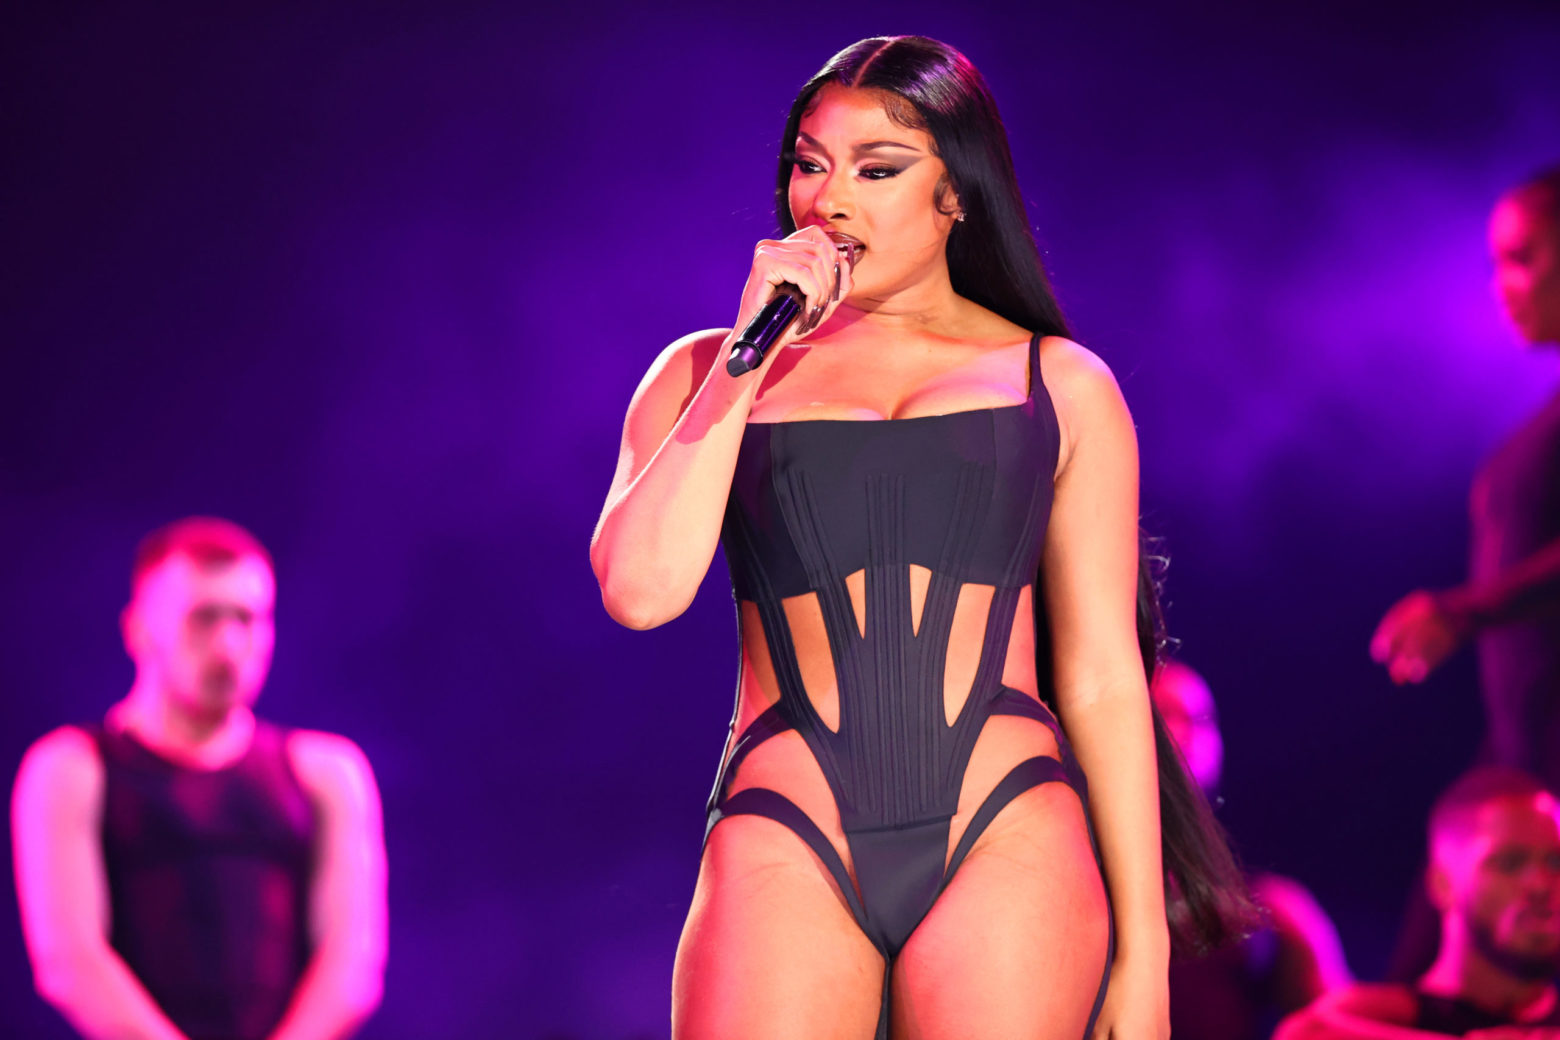 Does Megan Thee Stallion Have A New Boyfriend? Here’s What We Know